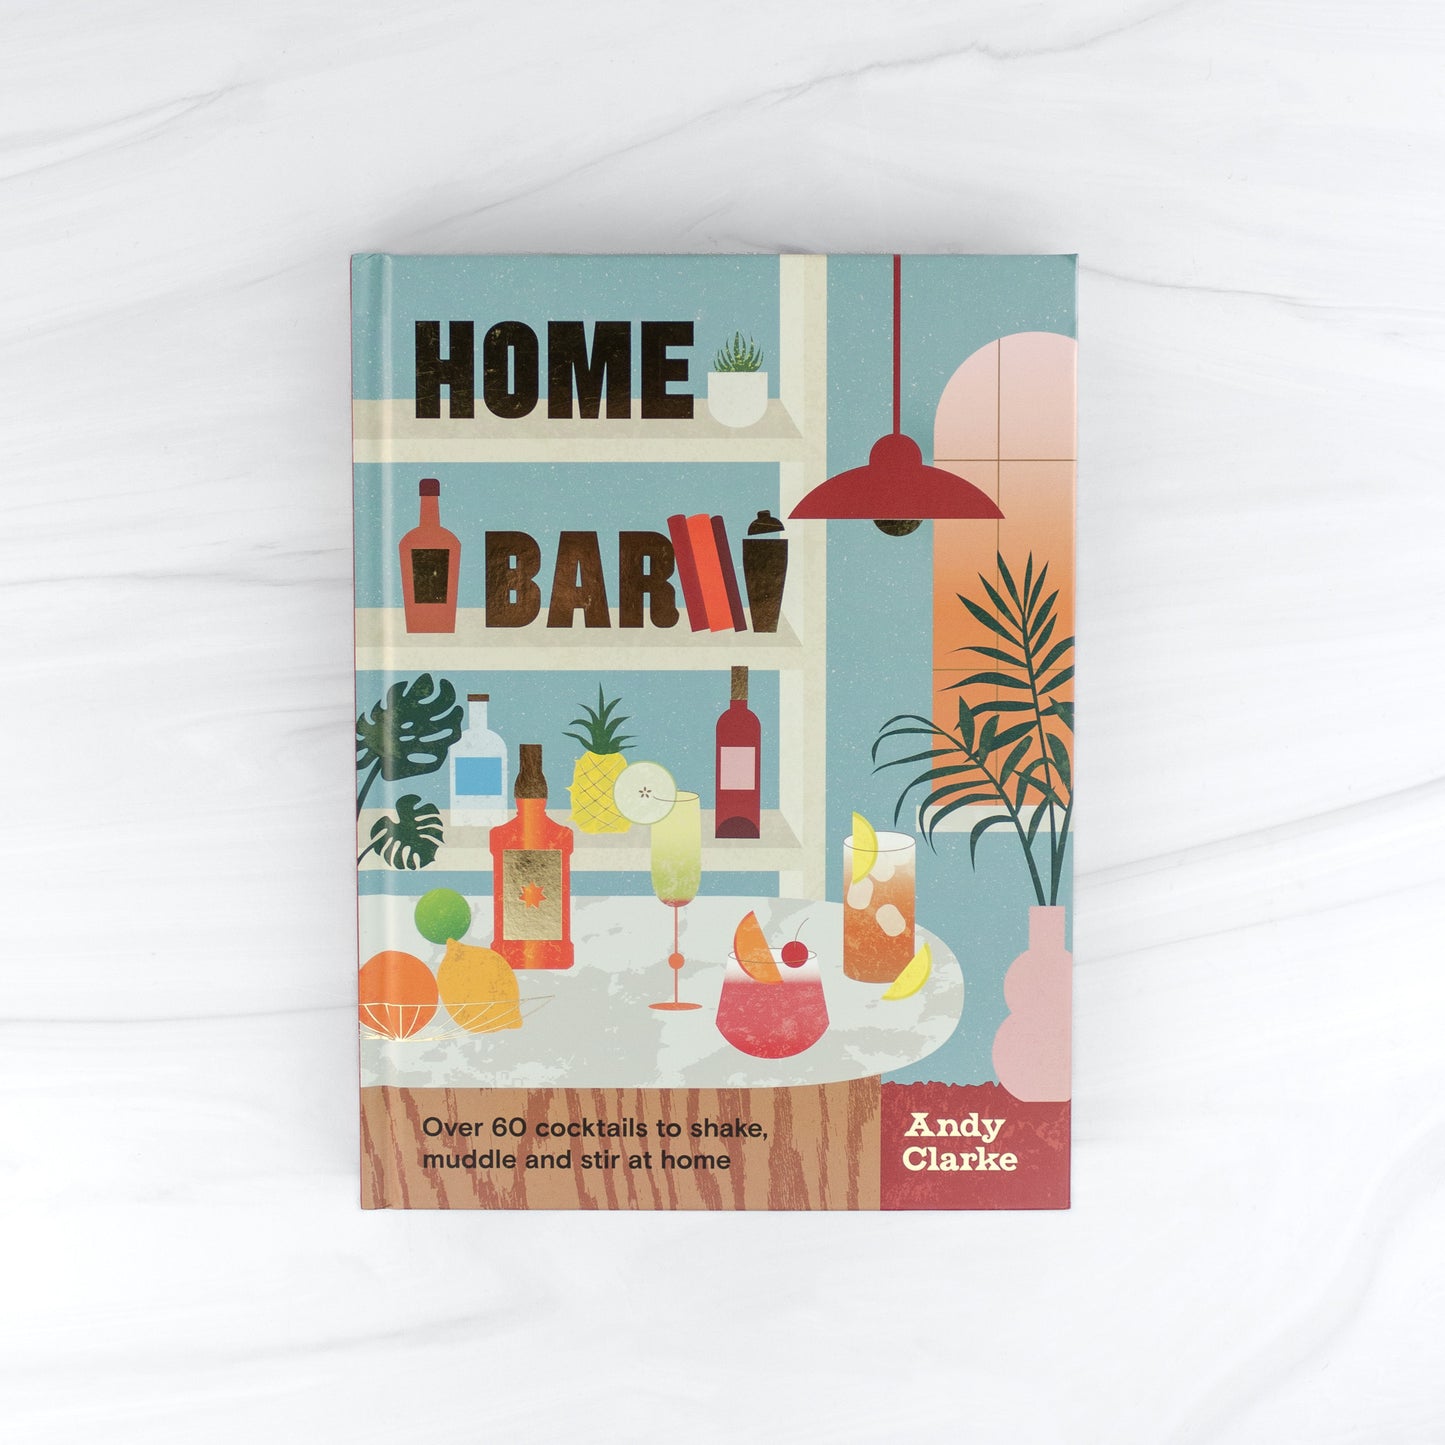 Home Bar: Over 60 cocktails to shake, muddle and stir at home